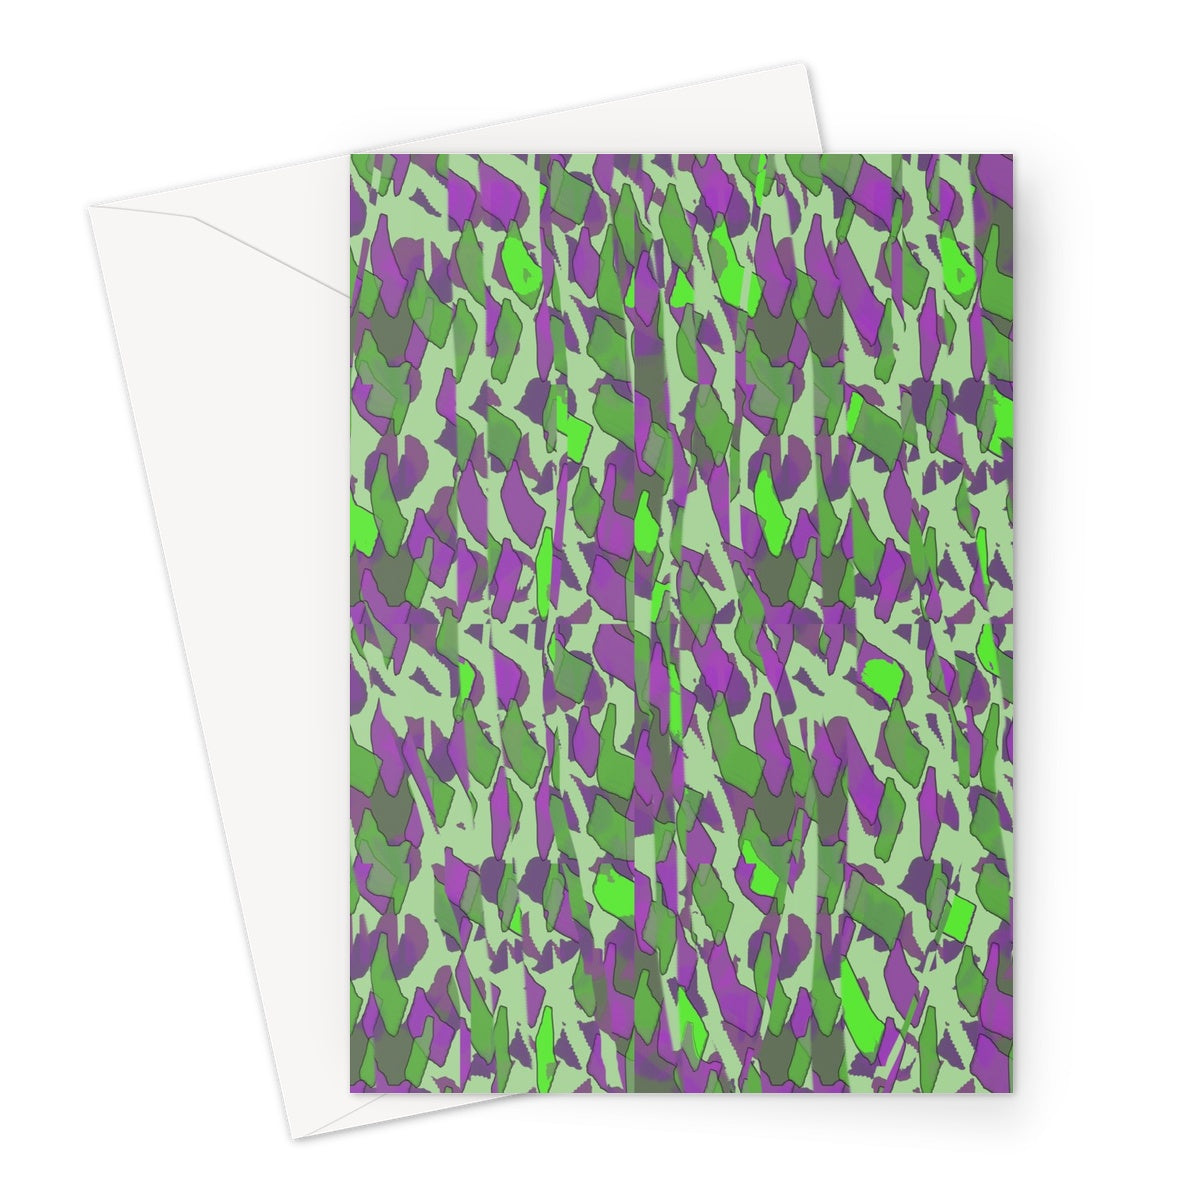 Patterned Abstract Green Purple Greeting Card